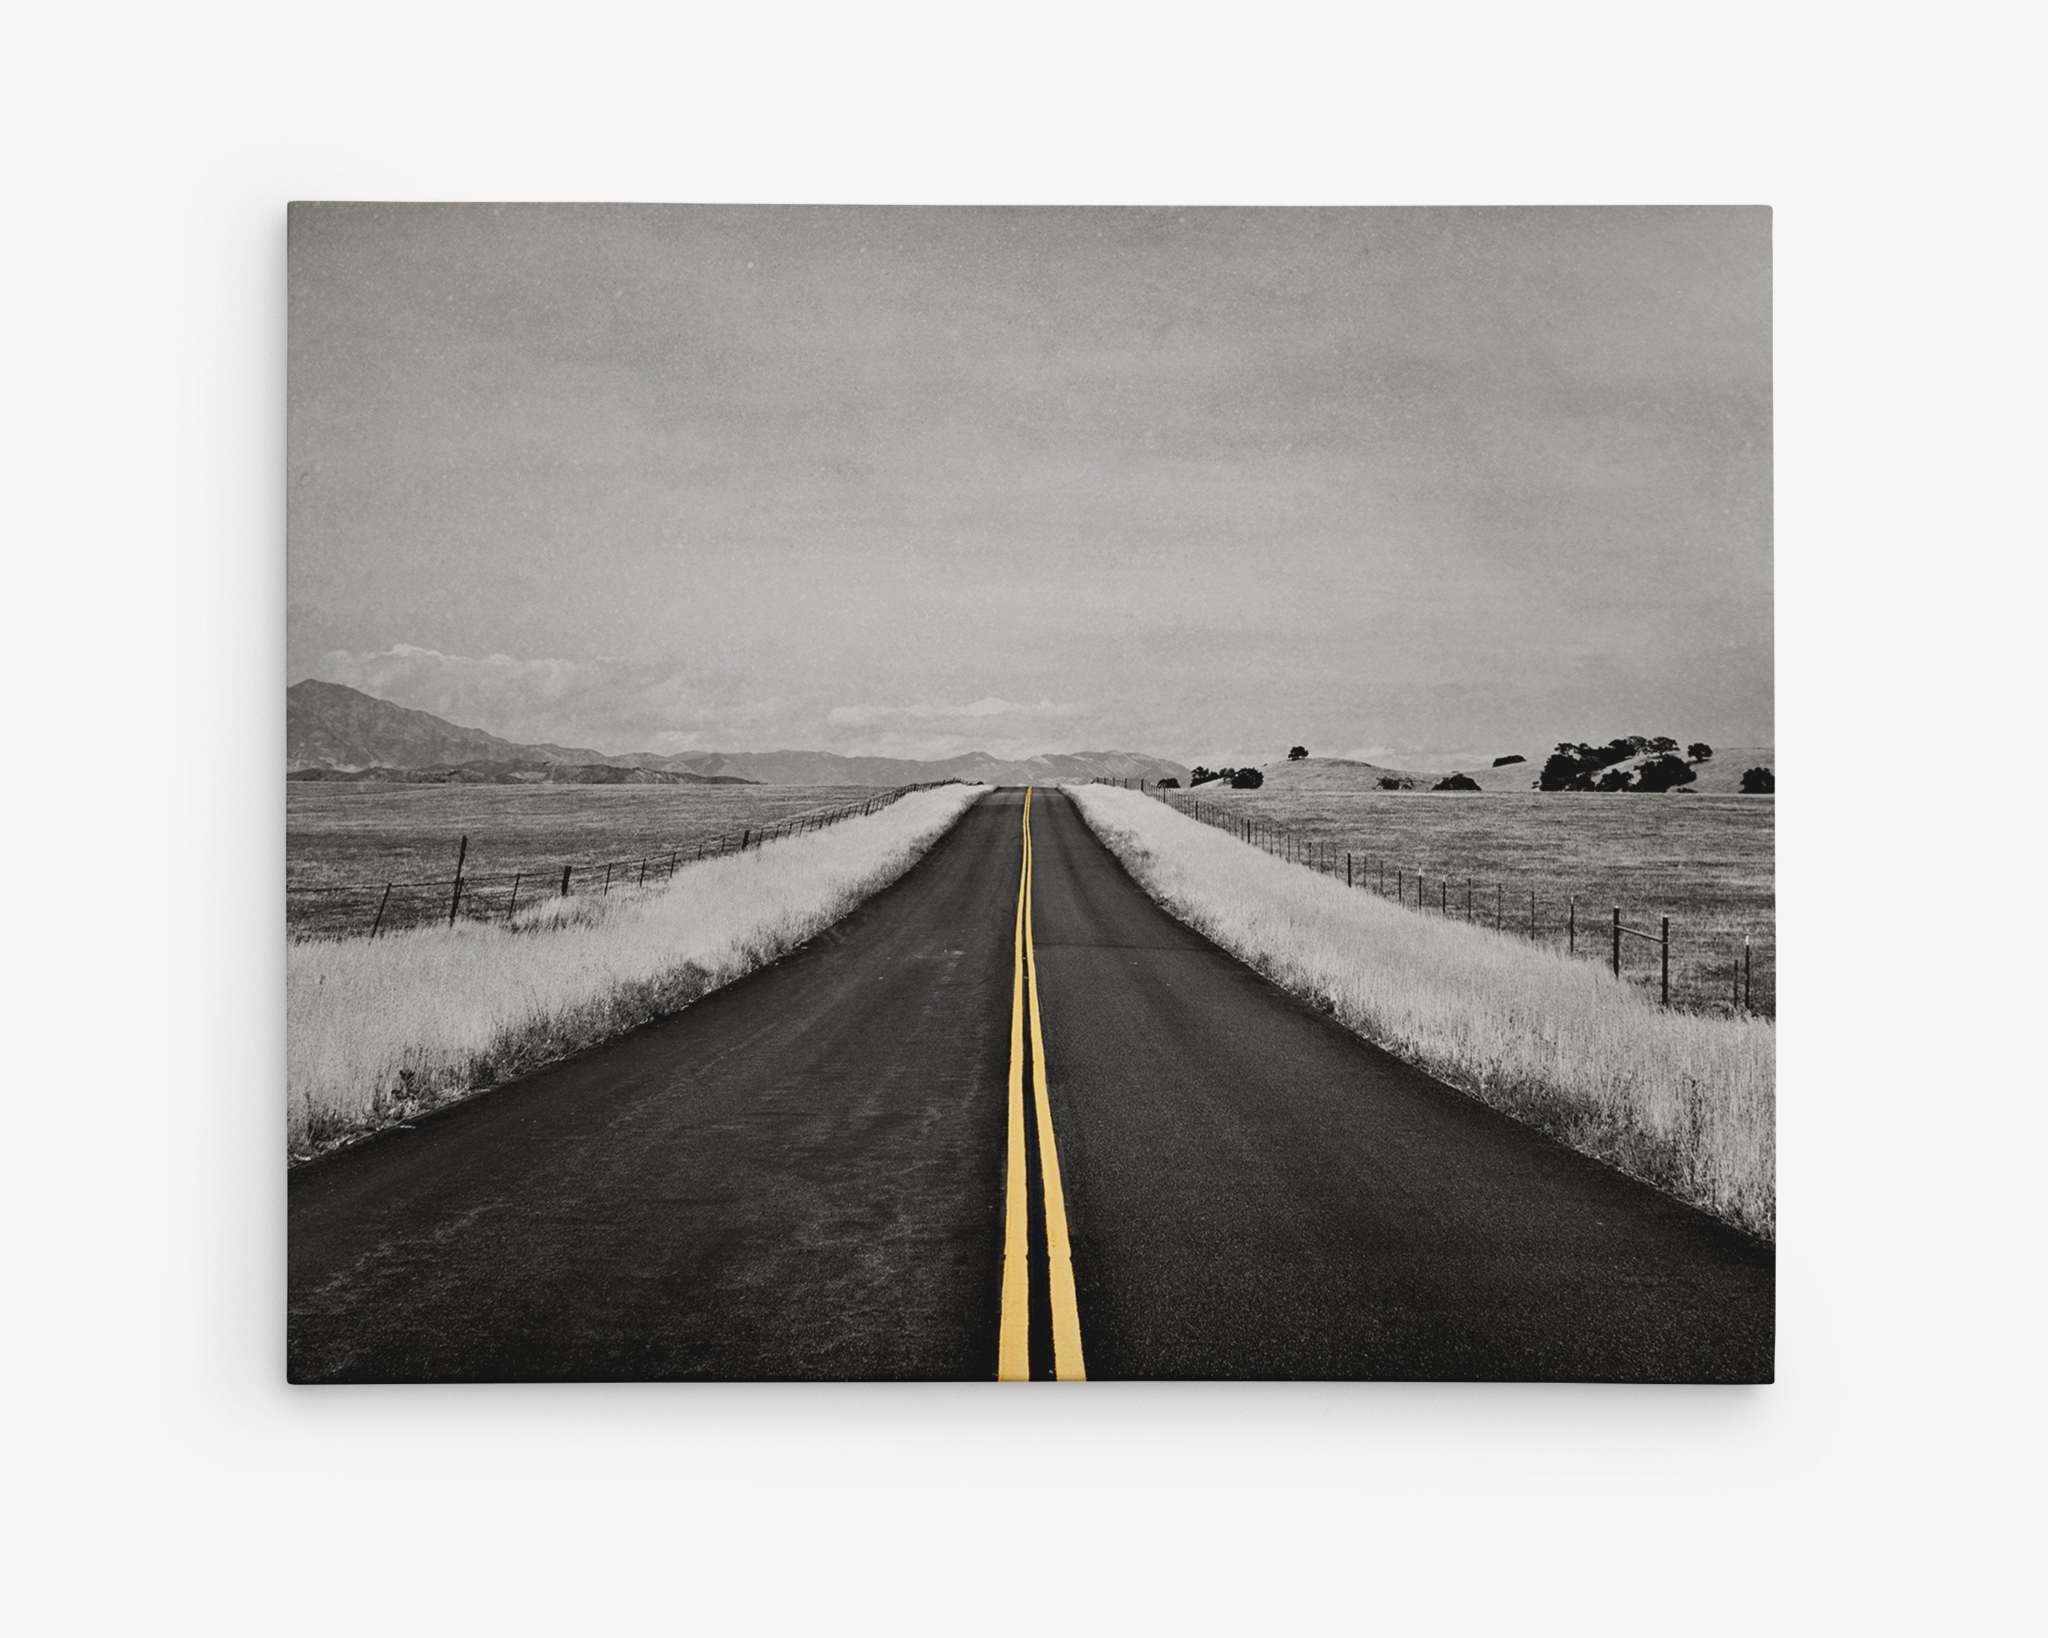 A black-and-white photograph captures a long, straight road stretching into the distance, reminiscent of a yellow brick road. The road is flanked by grassy fields and features a solid yellow line down the center. The horizon is faintly visible under a cloudy sky—ideal for striking canvas prints or wall art like Offley Green's 'Yellow Road Trip,' Black and White Road Photography with Color Accent.